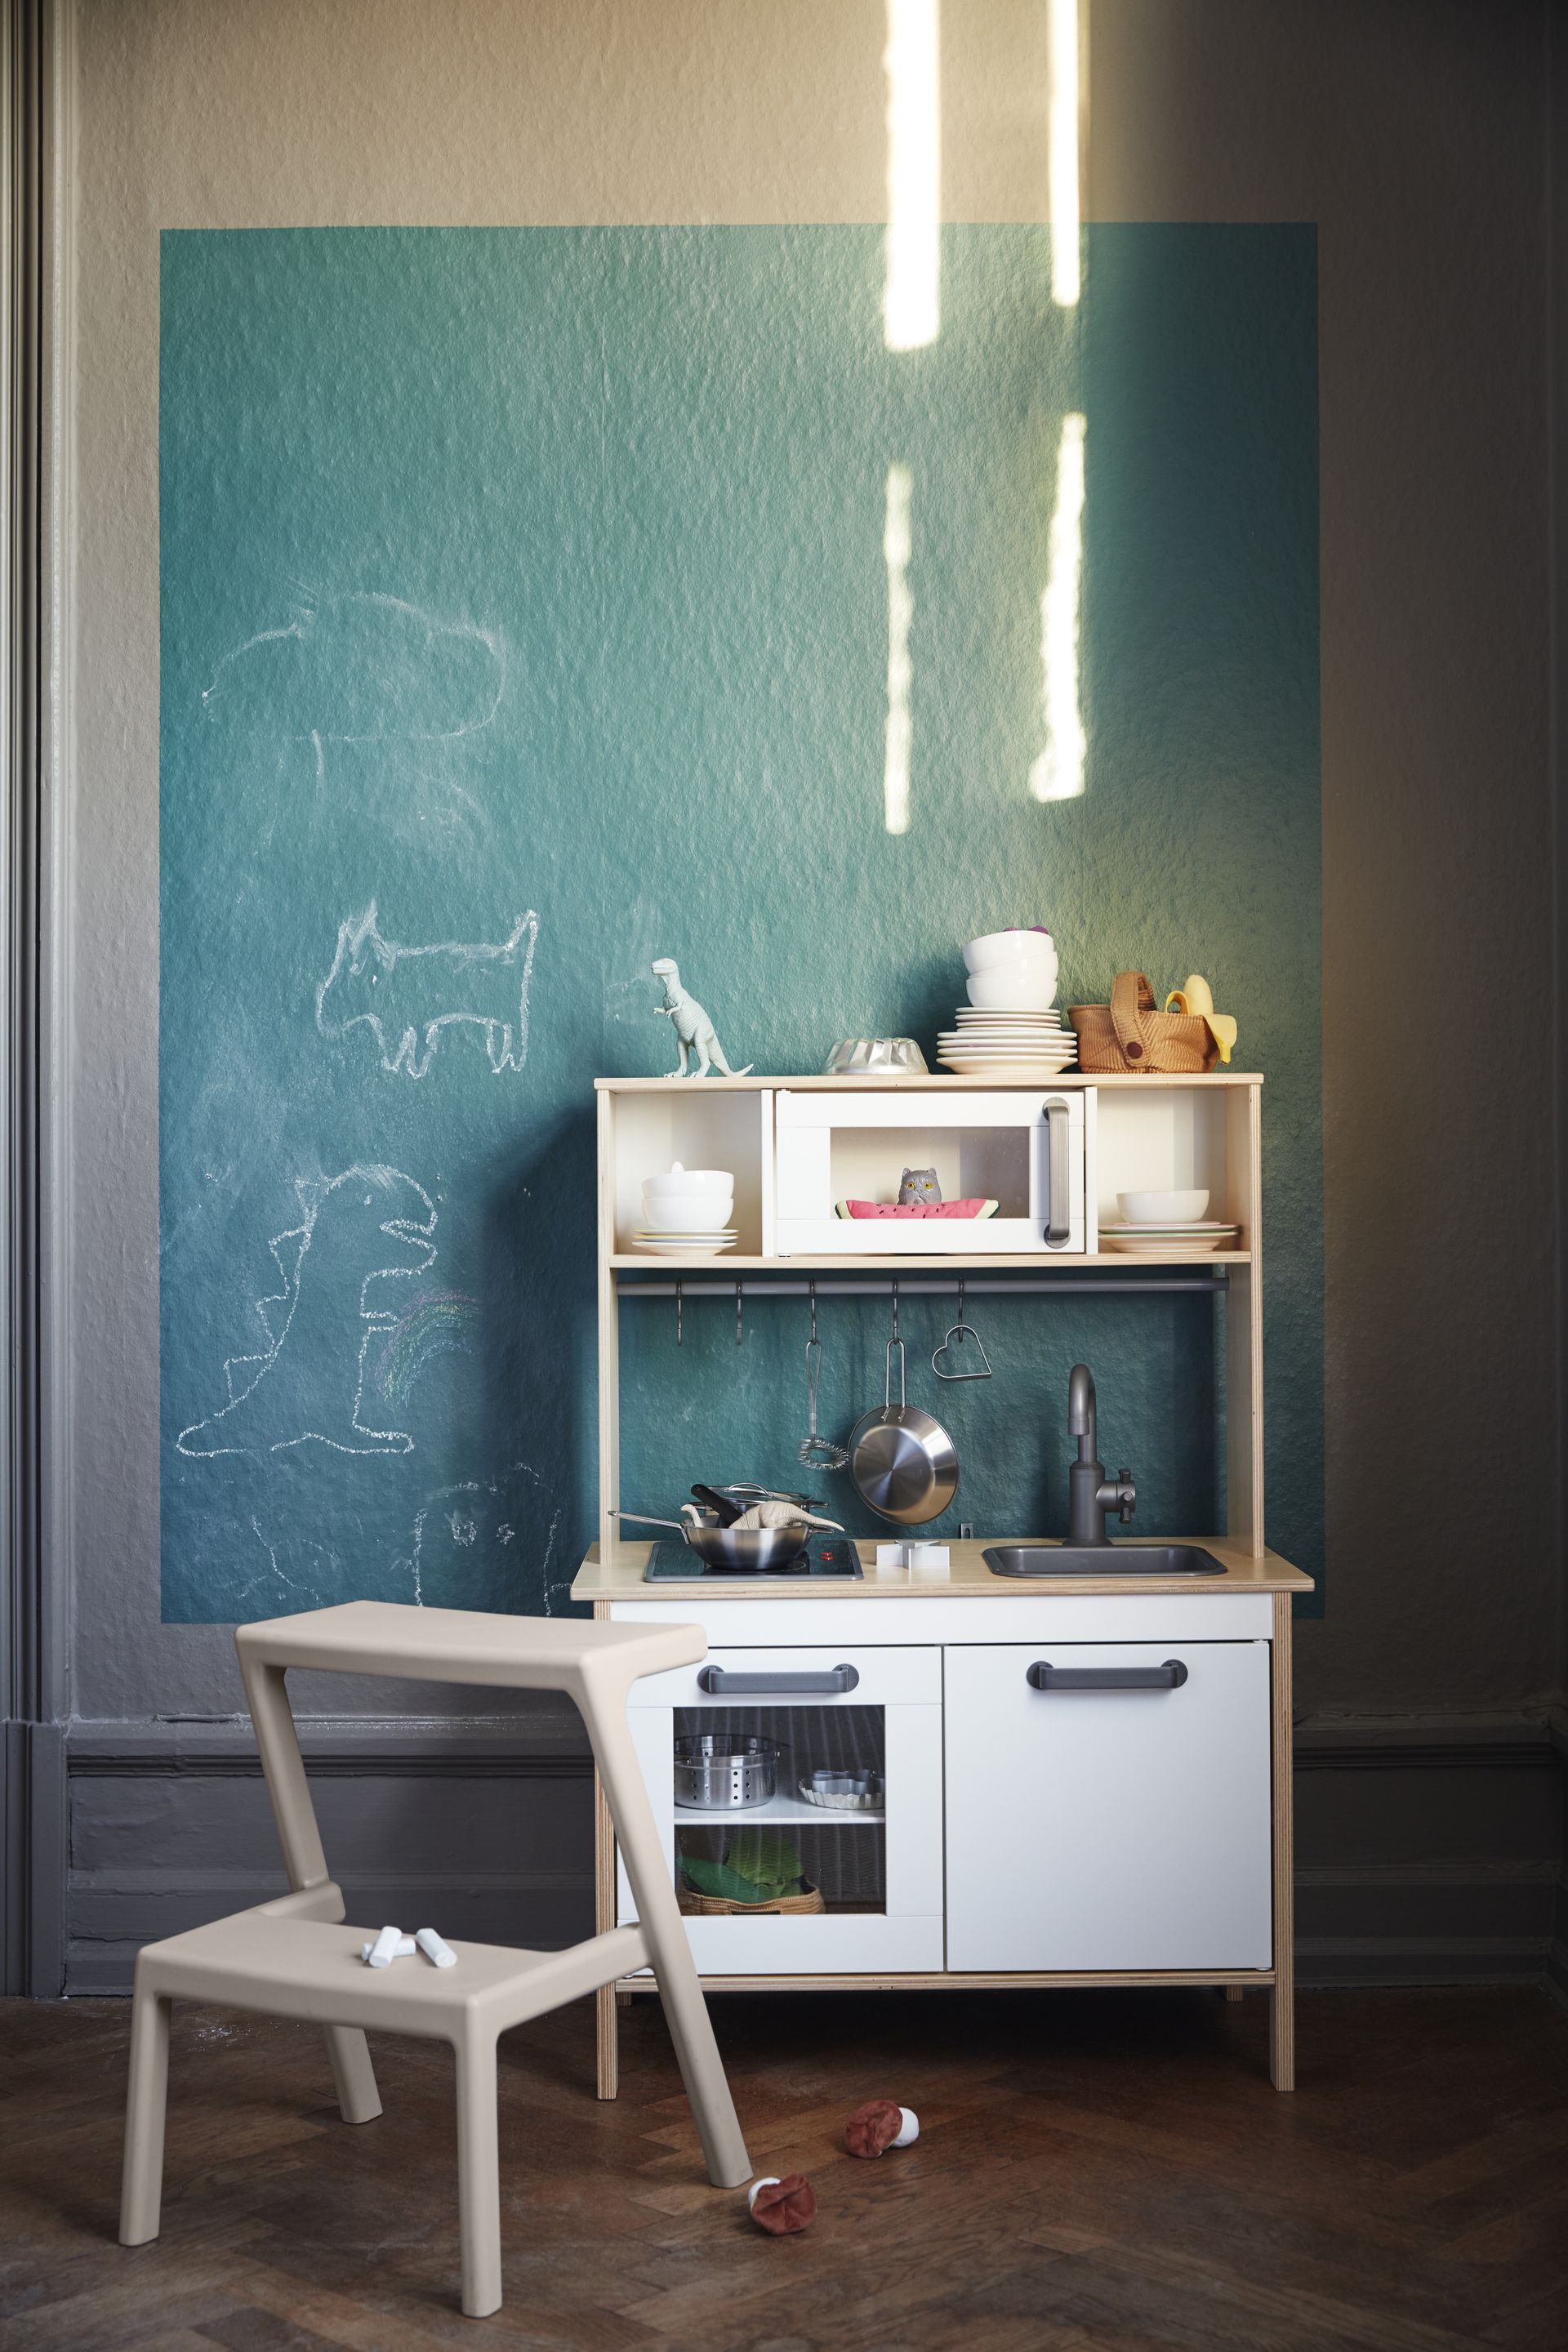 <p>                     Instead of buying reams of paper that will most likely end up in the recycling, why not use chalkboard paint in your playroom? It’s really effective and can easily be wiped down after. And if you choose blackboard paint as your base, your kids can use chalk to design – and constantly redesign – your walls.                   </p>                                      <p>                     ‘Many children thrive on creativity and the freedom that comes from designing and creating their own artwork,’ says Tom Parker, children’s business leader at Ikea.                   </p>                                      <p>                     ‘Create a moment of calm and inspire your child’s inner artist. Having their own personal canvas is a wonderful way to encourage them to embrace their inner Picasso, experiment with their artistic freedom, express themselves and develop their mobility skills.                   </p>                                      <p>                     'Play has an important role in every child’s growth, encouraging the development of their language and social skills, and providing endless ways to keep them entertained.’                   </p>